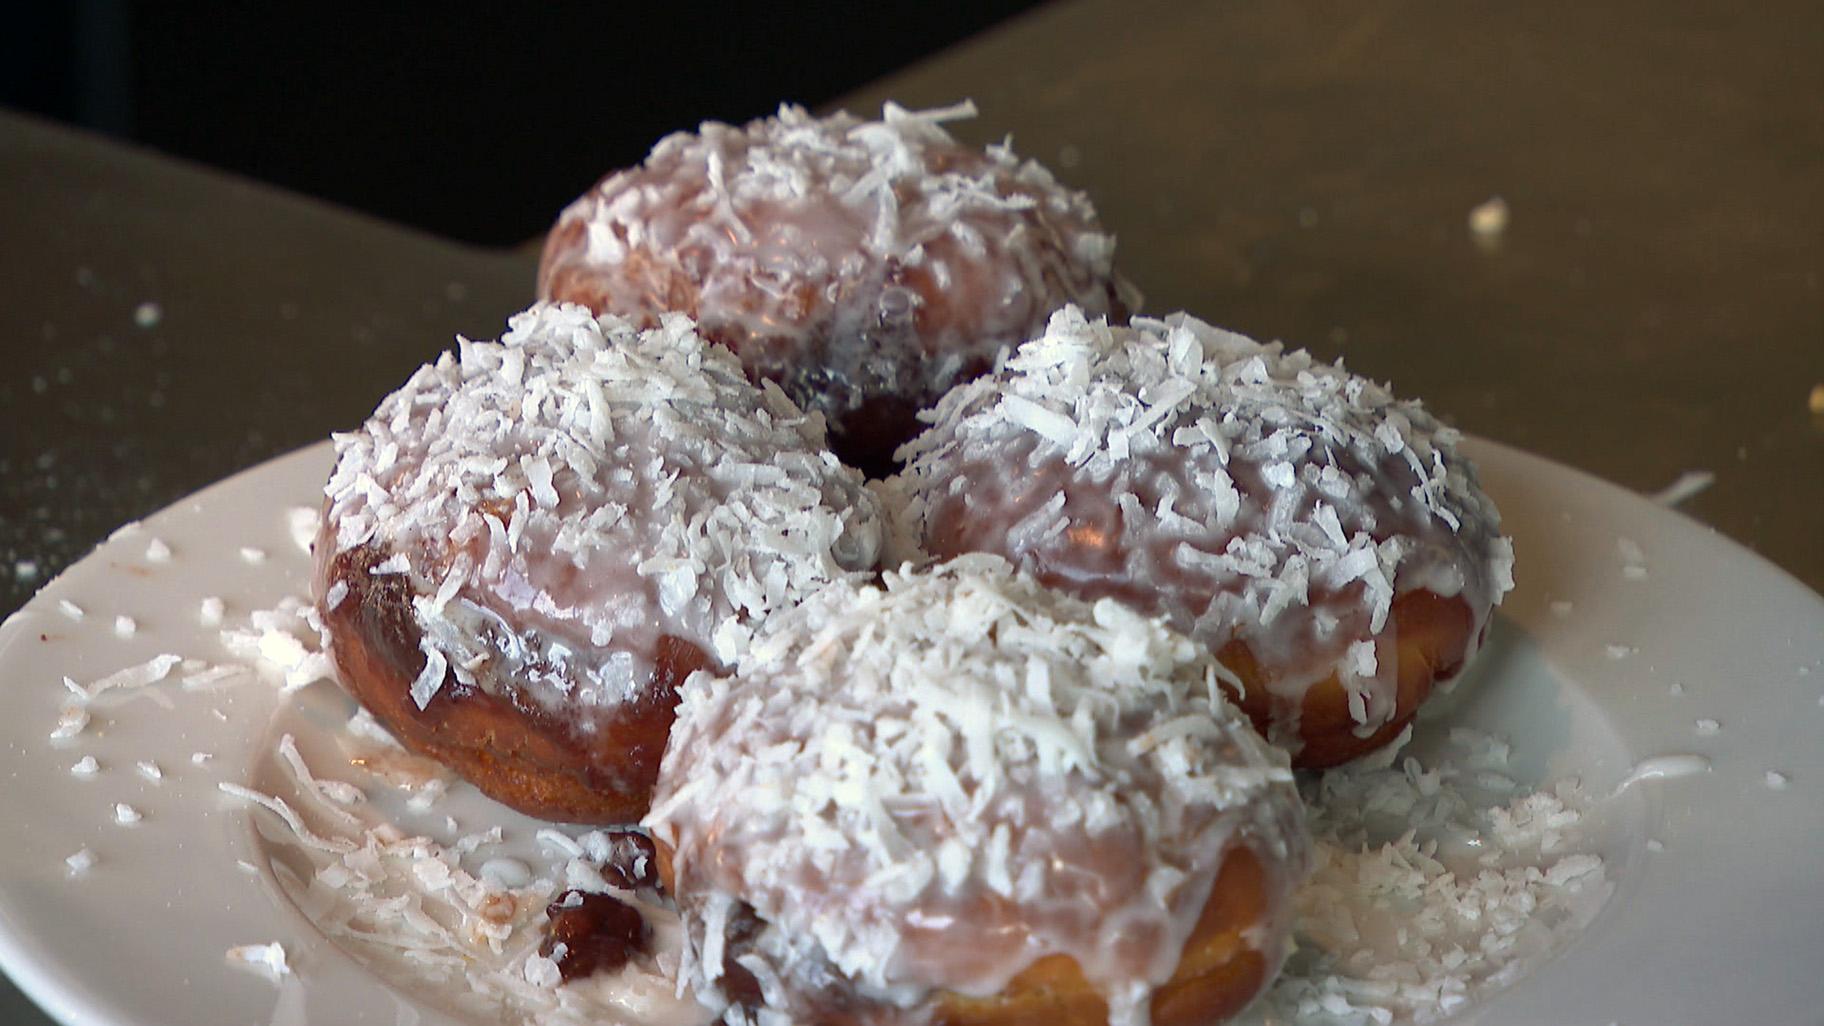 Guava coconut paczki from Polombia. (WTTW News)